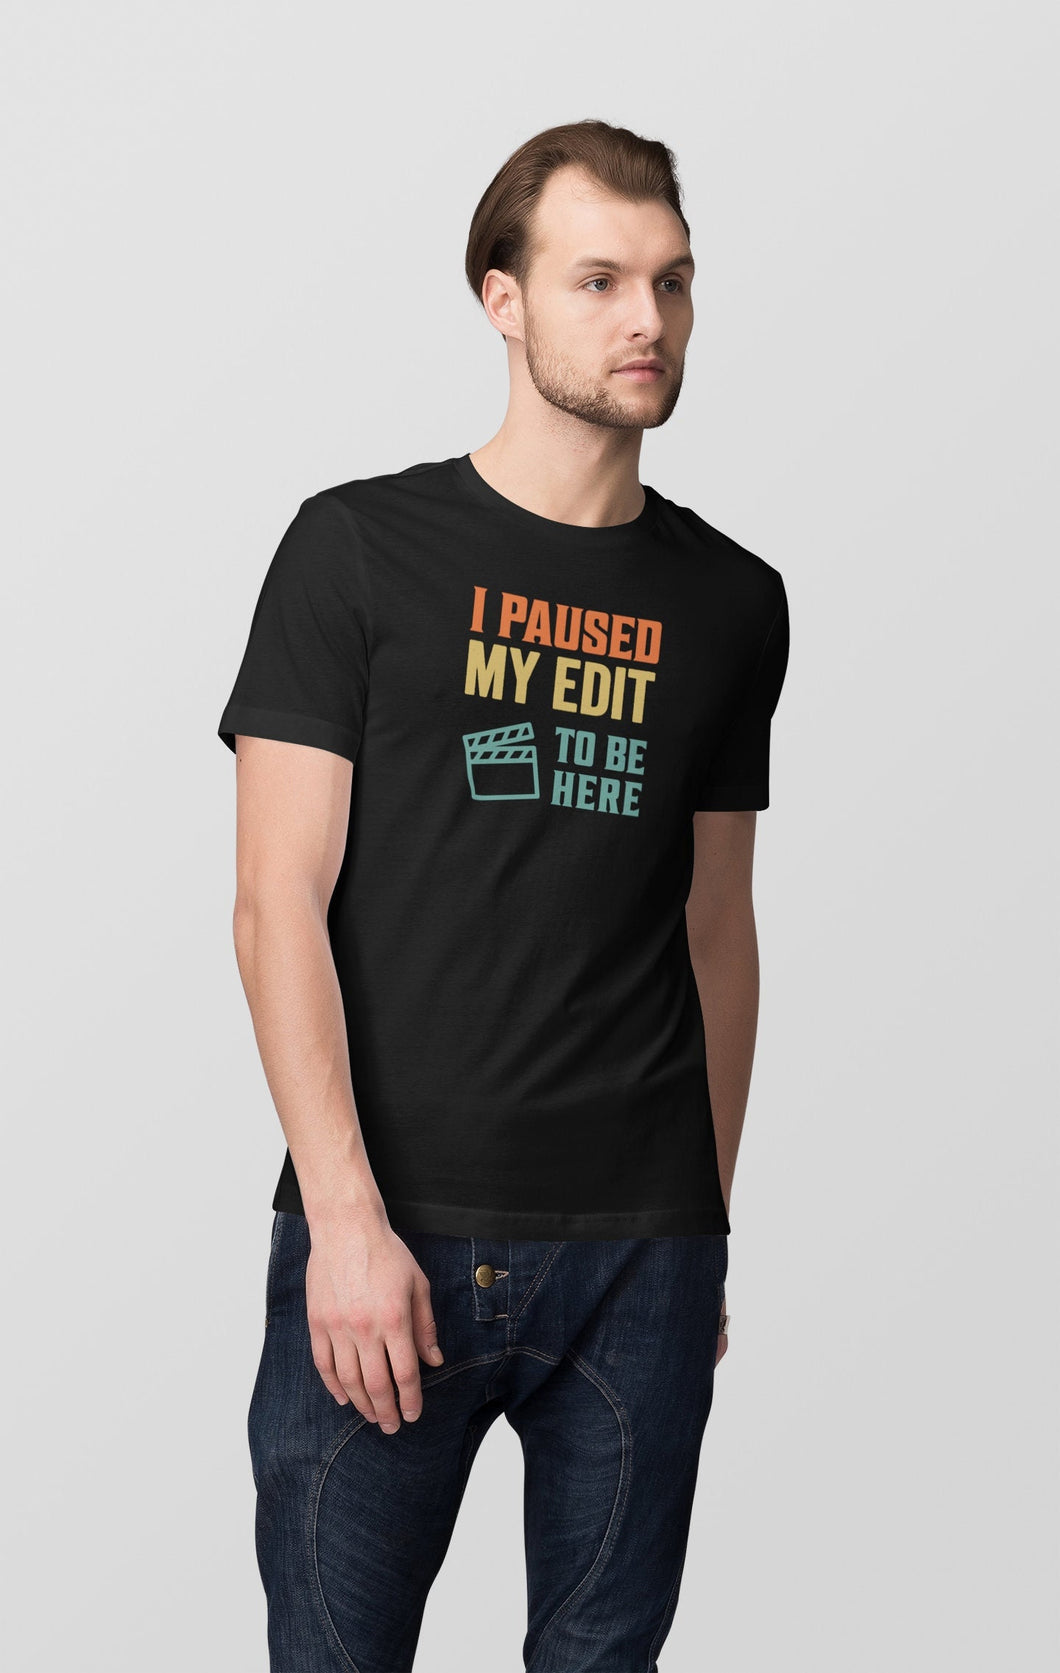 I Paused My Edit to Be Here Shirt, Editor Gift, Editor Shirt, Video Editor Gift, Movie Editor, Post Production Shirt